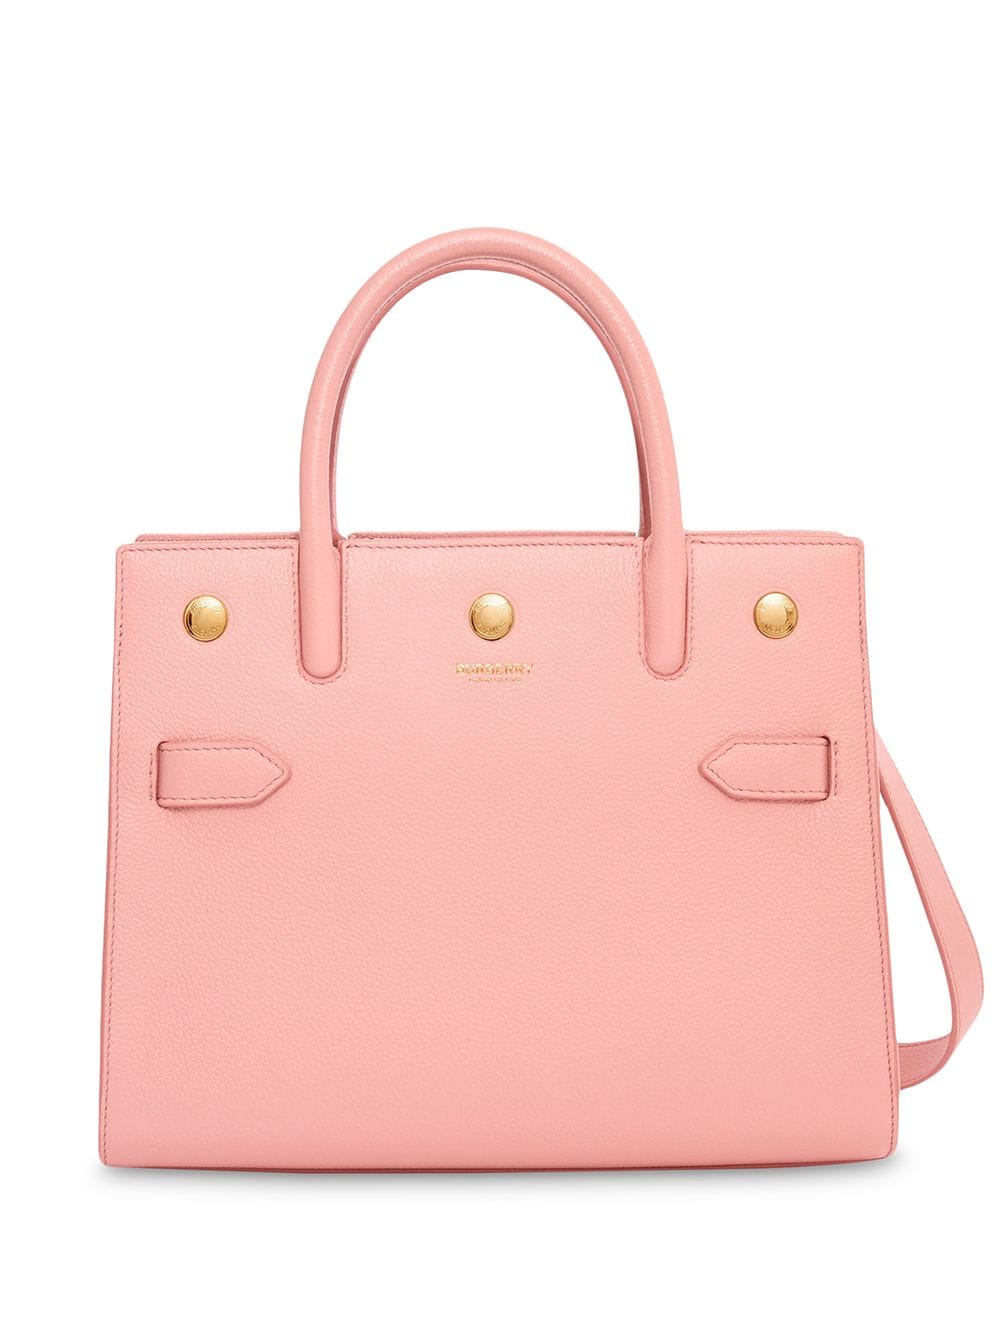 Burberry mini leather two-handle Title bag pink 8026891 - Farfetch